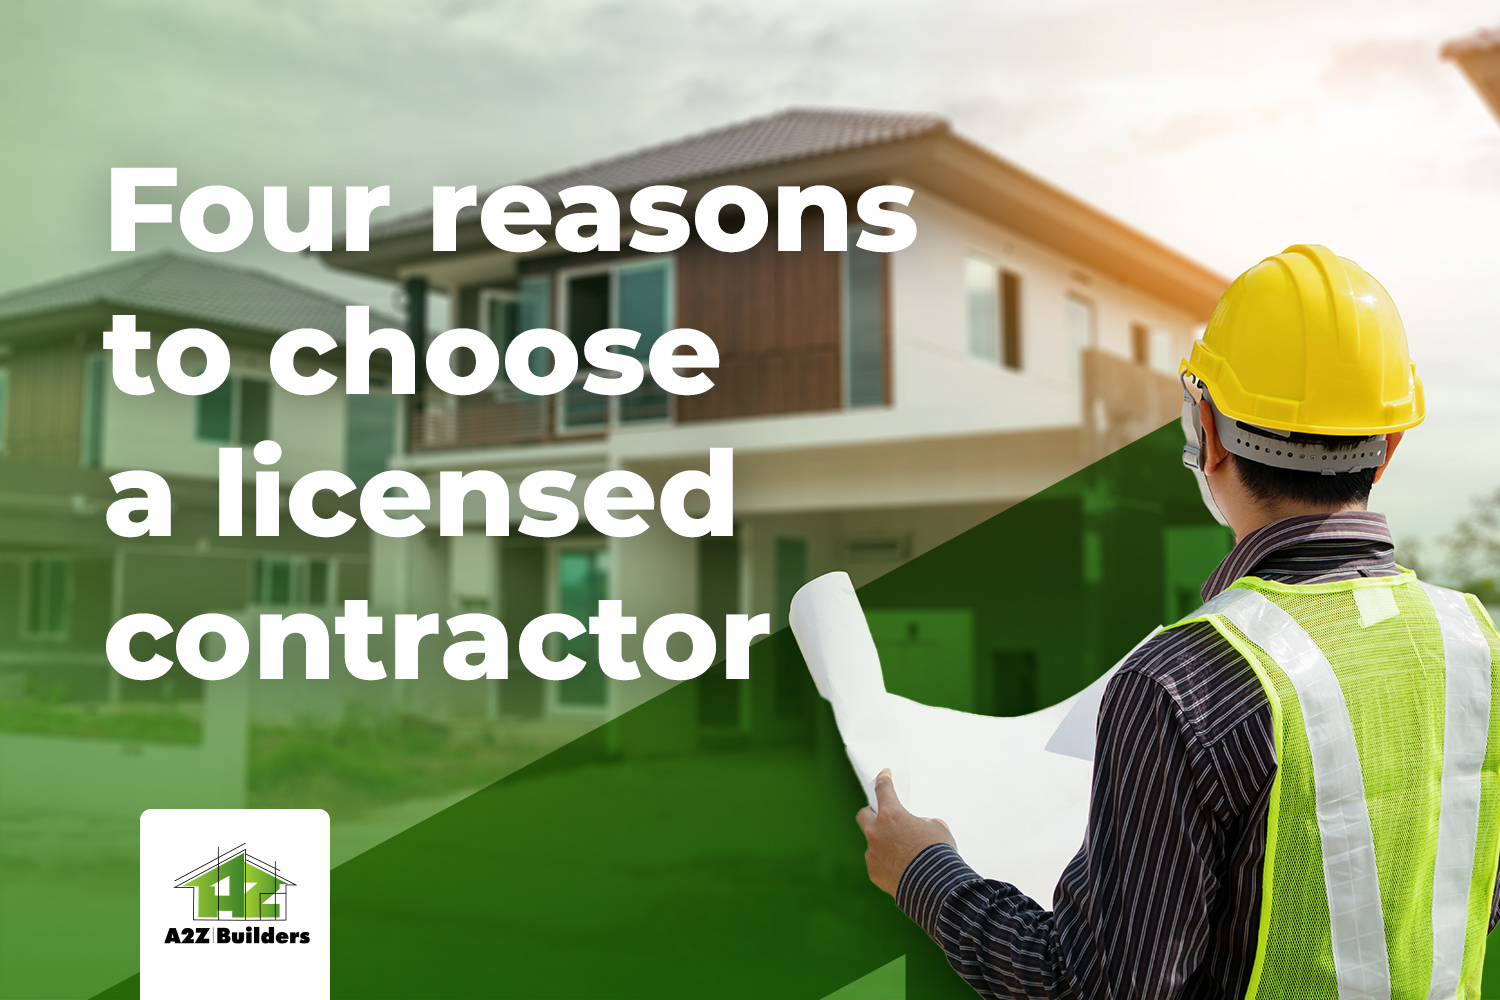 Four Reasons to Choose a Certified Contractor